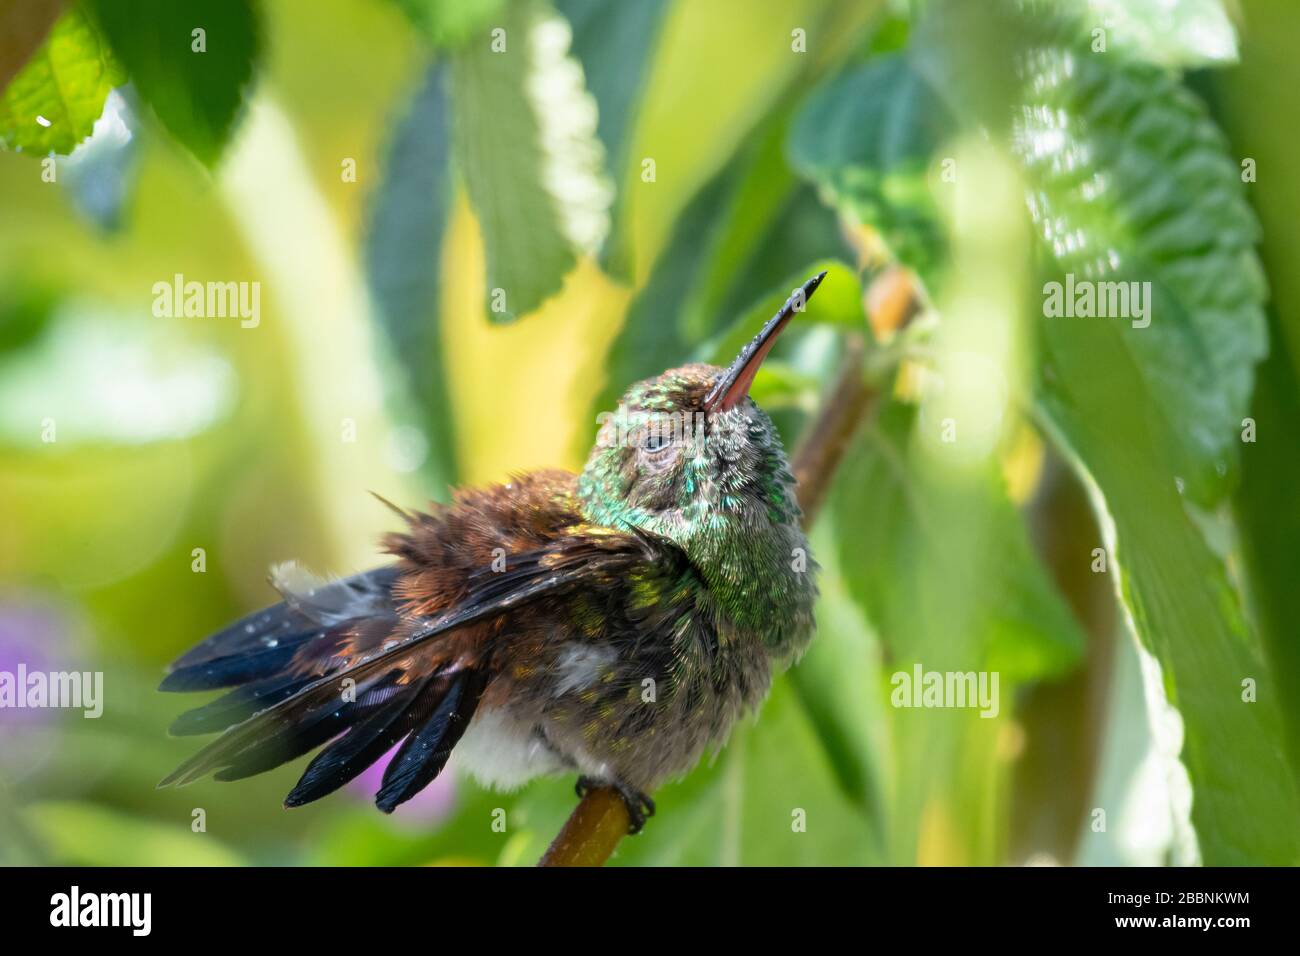 A juvenile Copper-rumped hummingbird fluffling his feathers after bathing in a rainstorm. Stock Photo